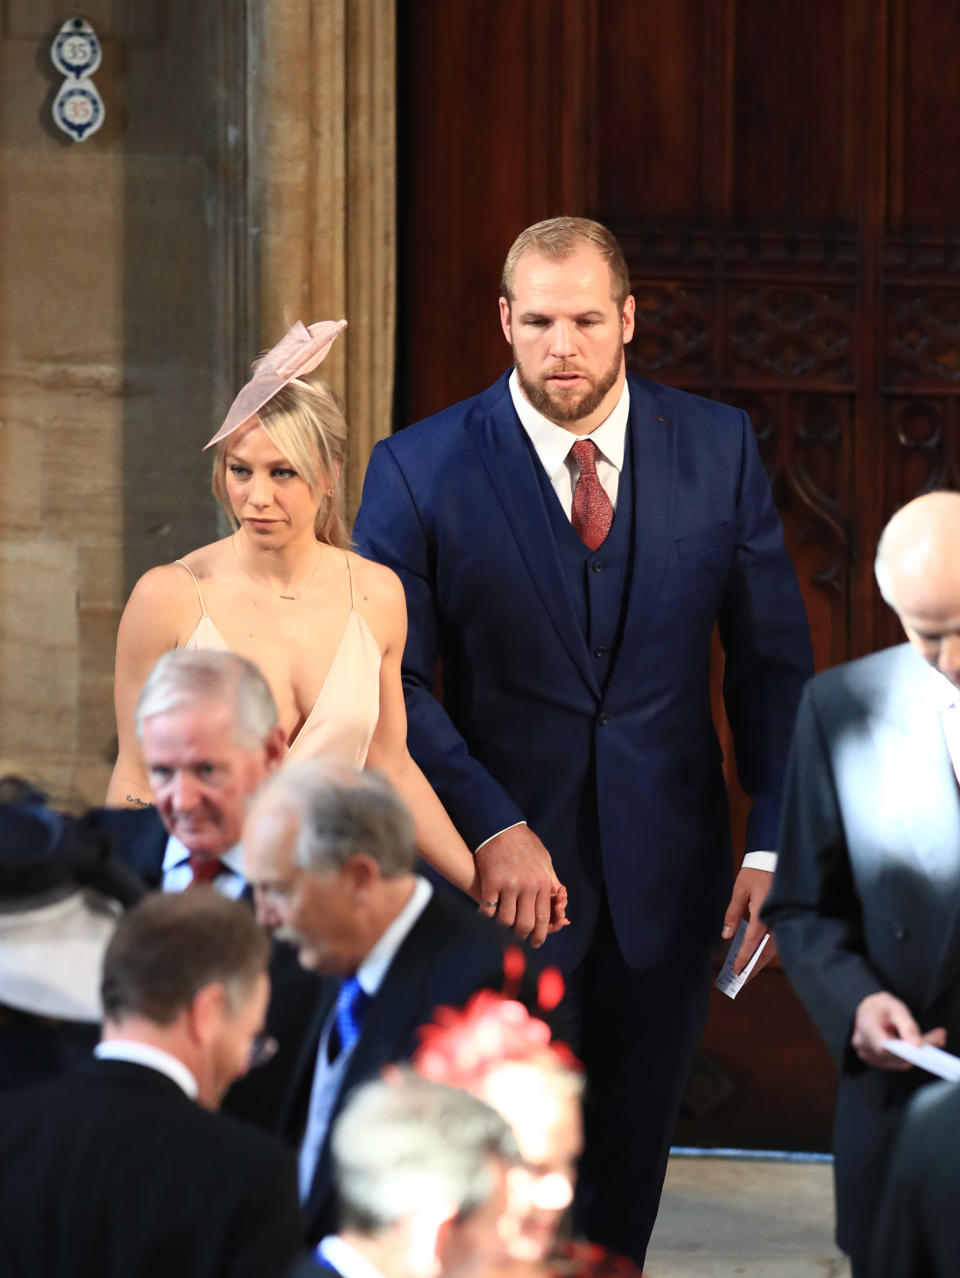 WINDSOR, UNITED KINGDOM - MAY 19:  James Haskell and Chloe Madeley arrive at St George's Chapel at Windsor Castle for the wedding of Prince Harry to Meghan Markle on May 19, 2018 in Windsor, England.. (Photo by Danny Lawson - WPA Pool/Getty Images)